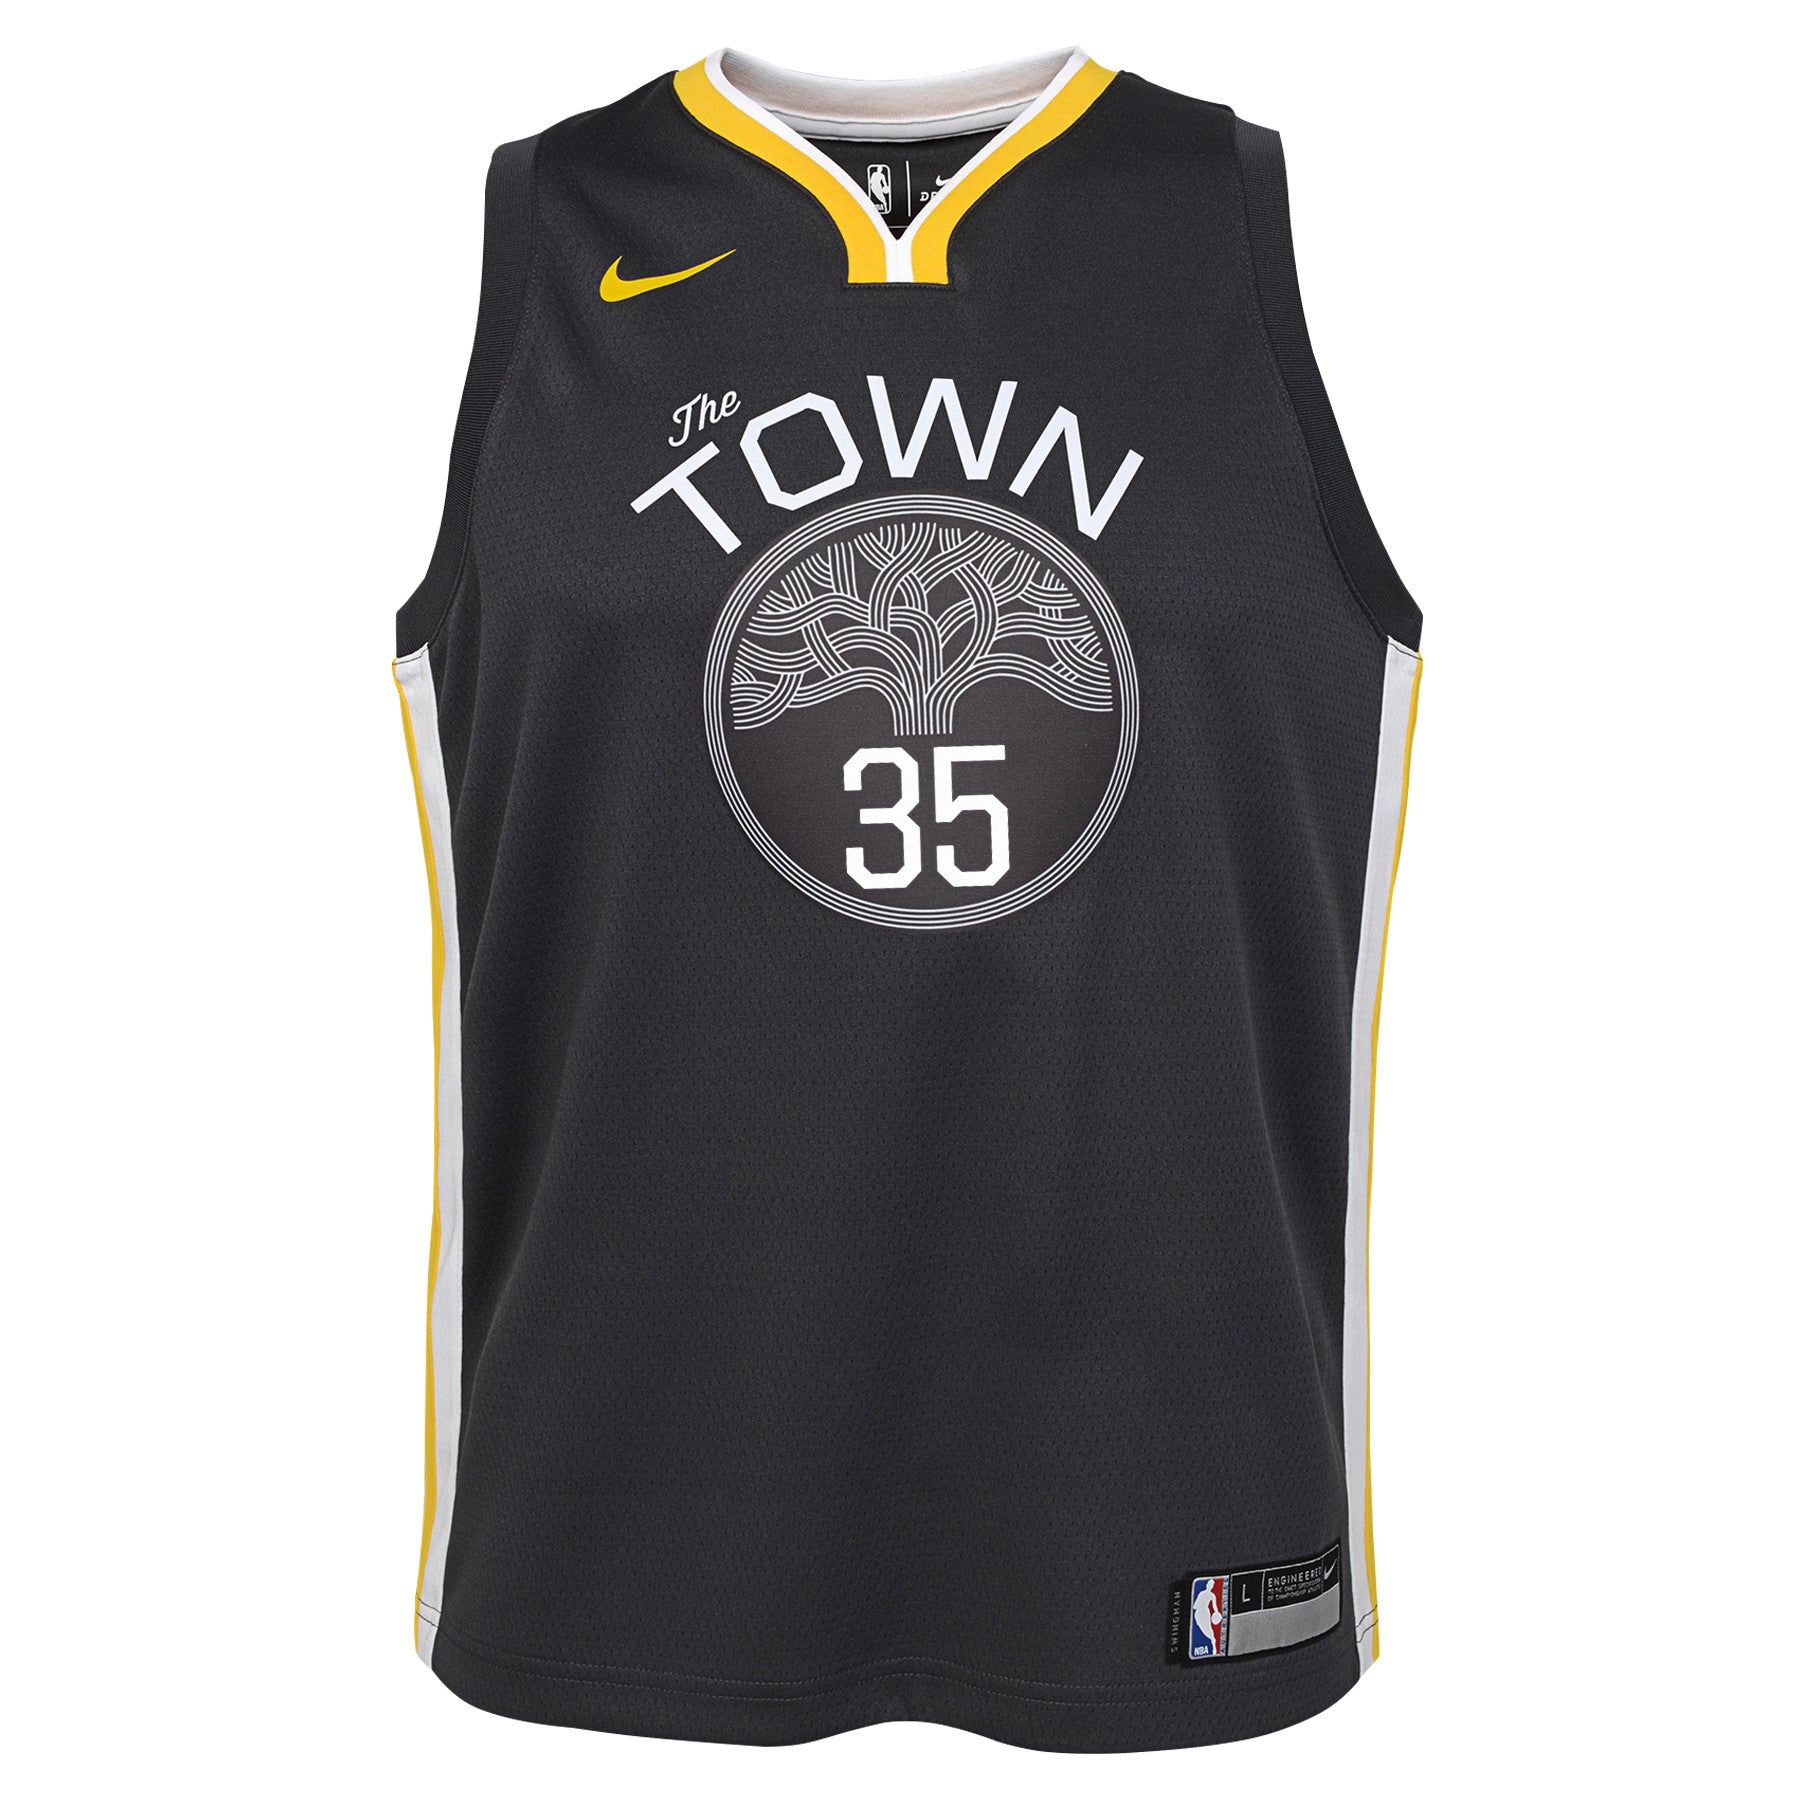 grey golden state jersey